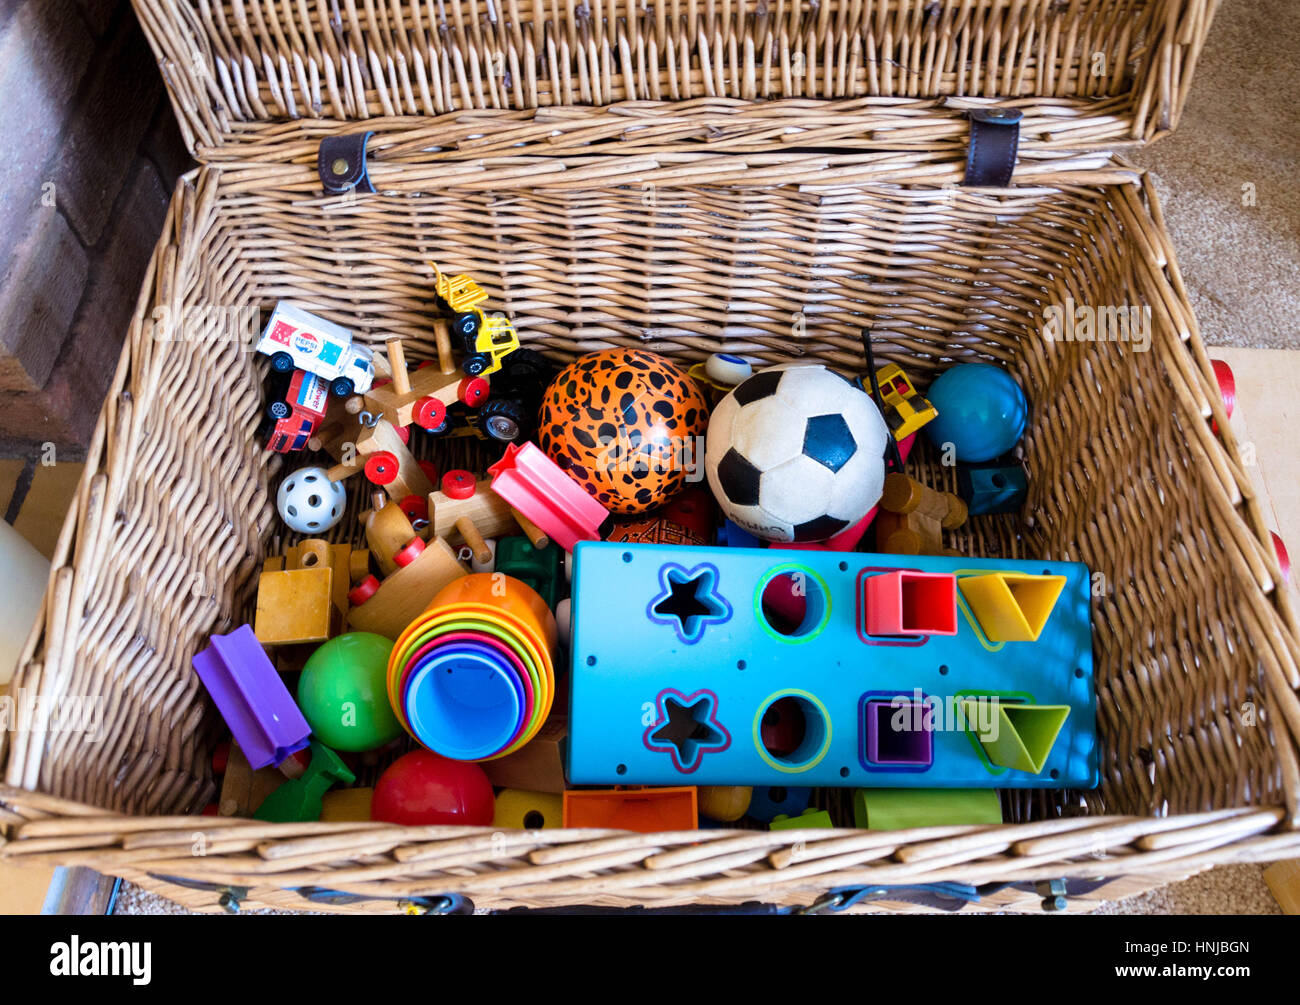 A toy box full of toys Stock Photo - Alamy